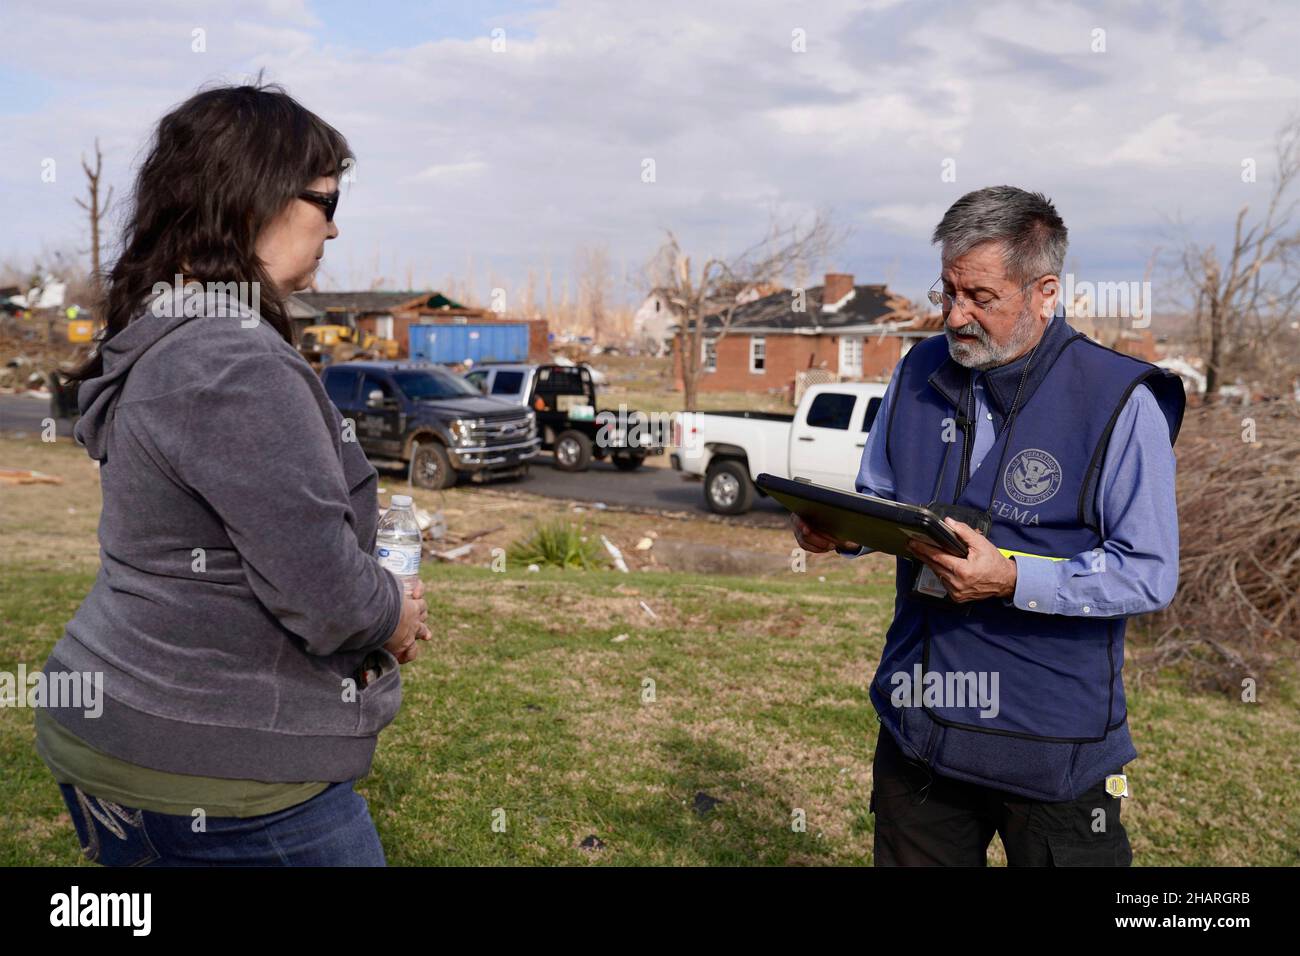 Dawson Springs, United States of America. 14 December, 2021. FEMA Disaster Survivors Assistance teams work with residents to provide assistance in the aftermath of devastating tornadoes that swept across four states destroying structures and killing dozens December 14, 2021 in Dawson Springs, Kentucky. Credit: Dominick Del Vecchio/FEMA/Alamy Live News Stock Photo